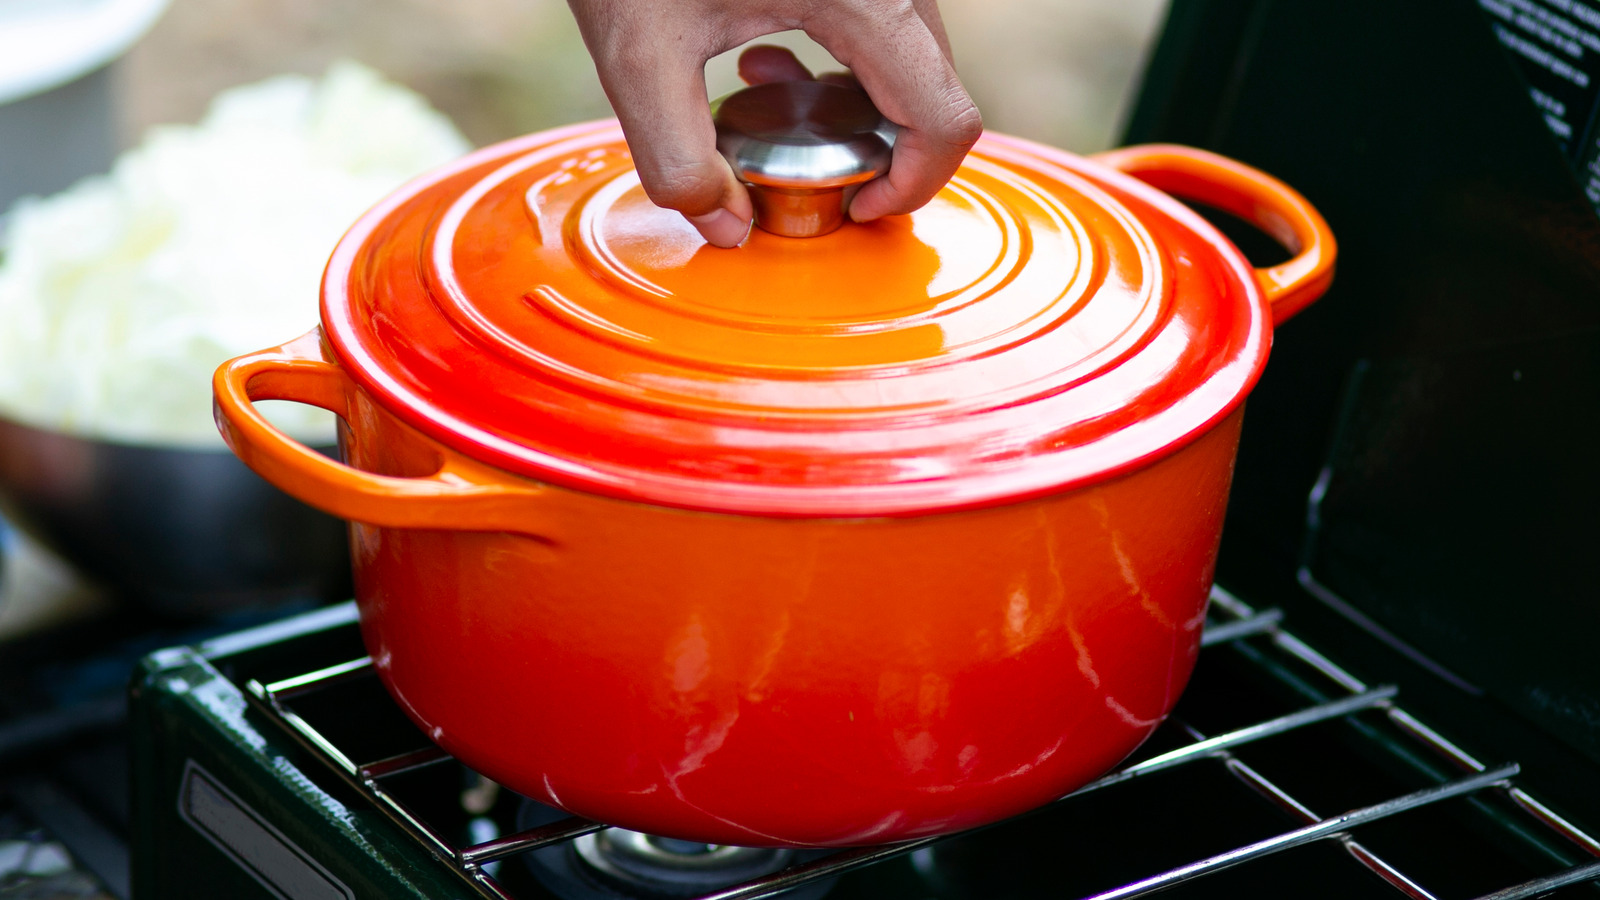 How to Clean a Dutch Oven - Best Ways to Clean an Enameled Cast